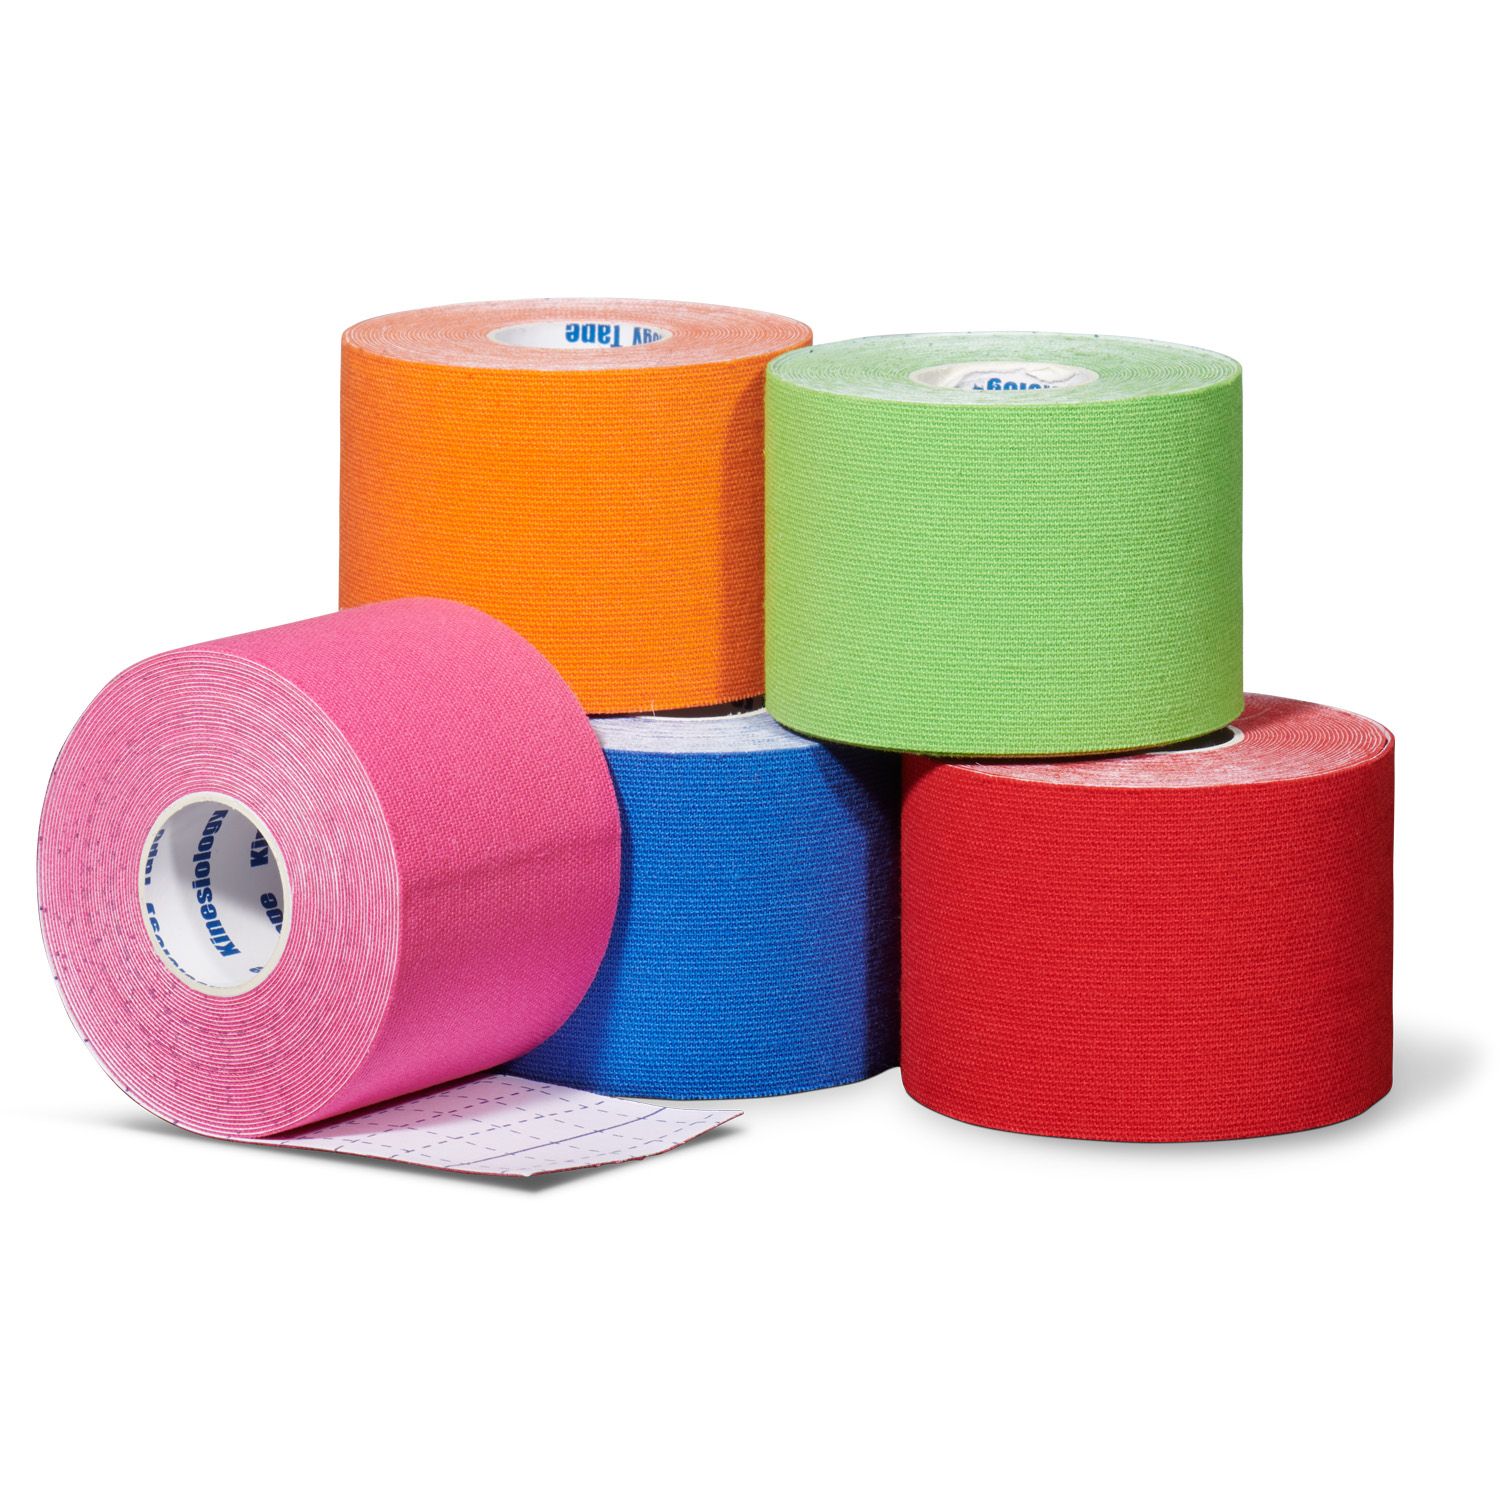 kinesiology tape 4 rolls plus 1 roll for free